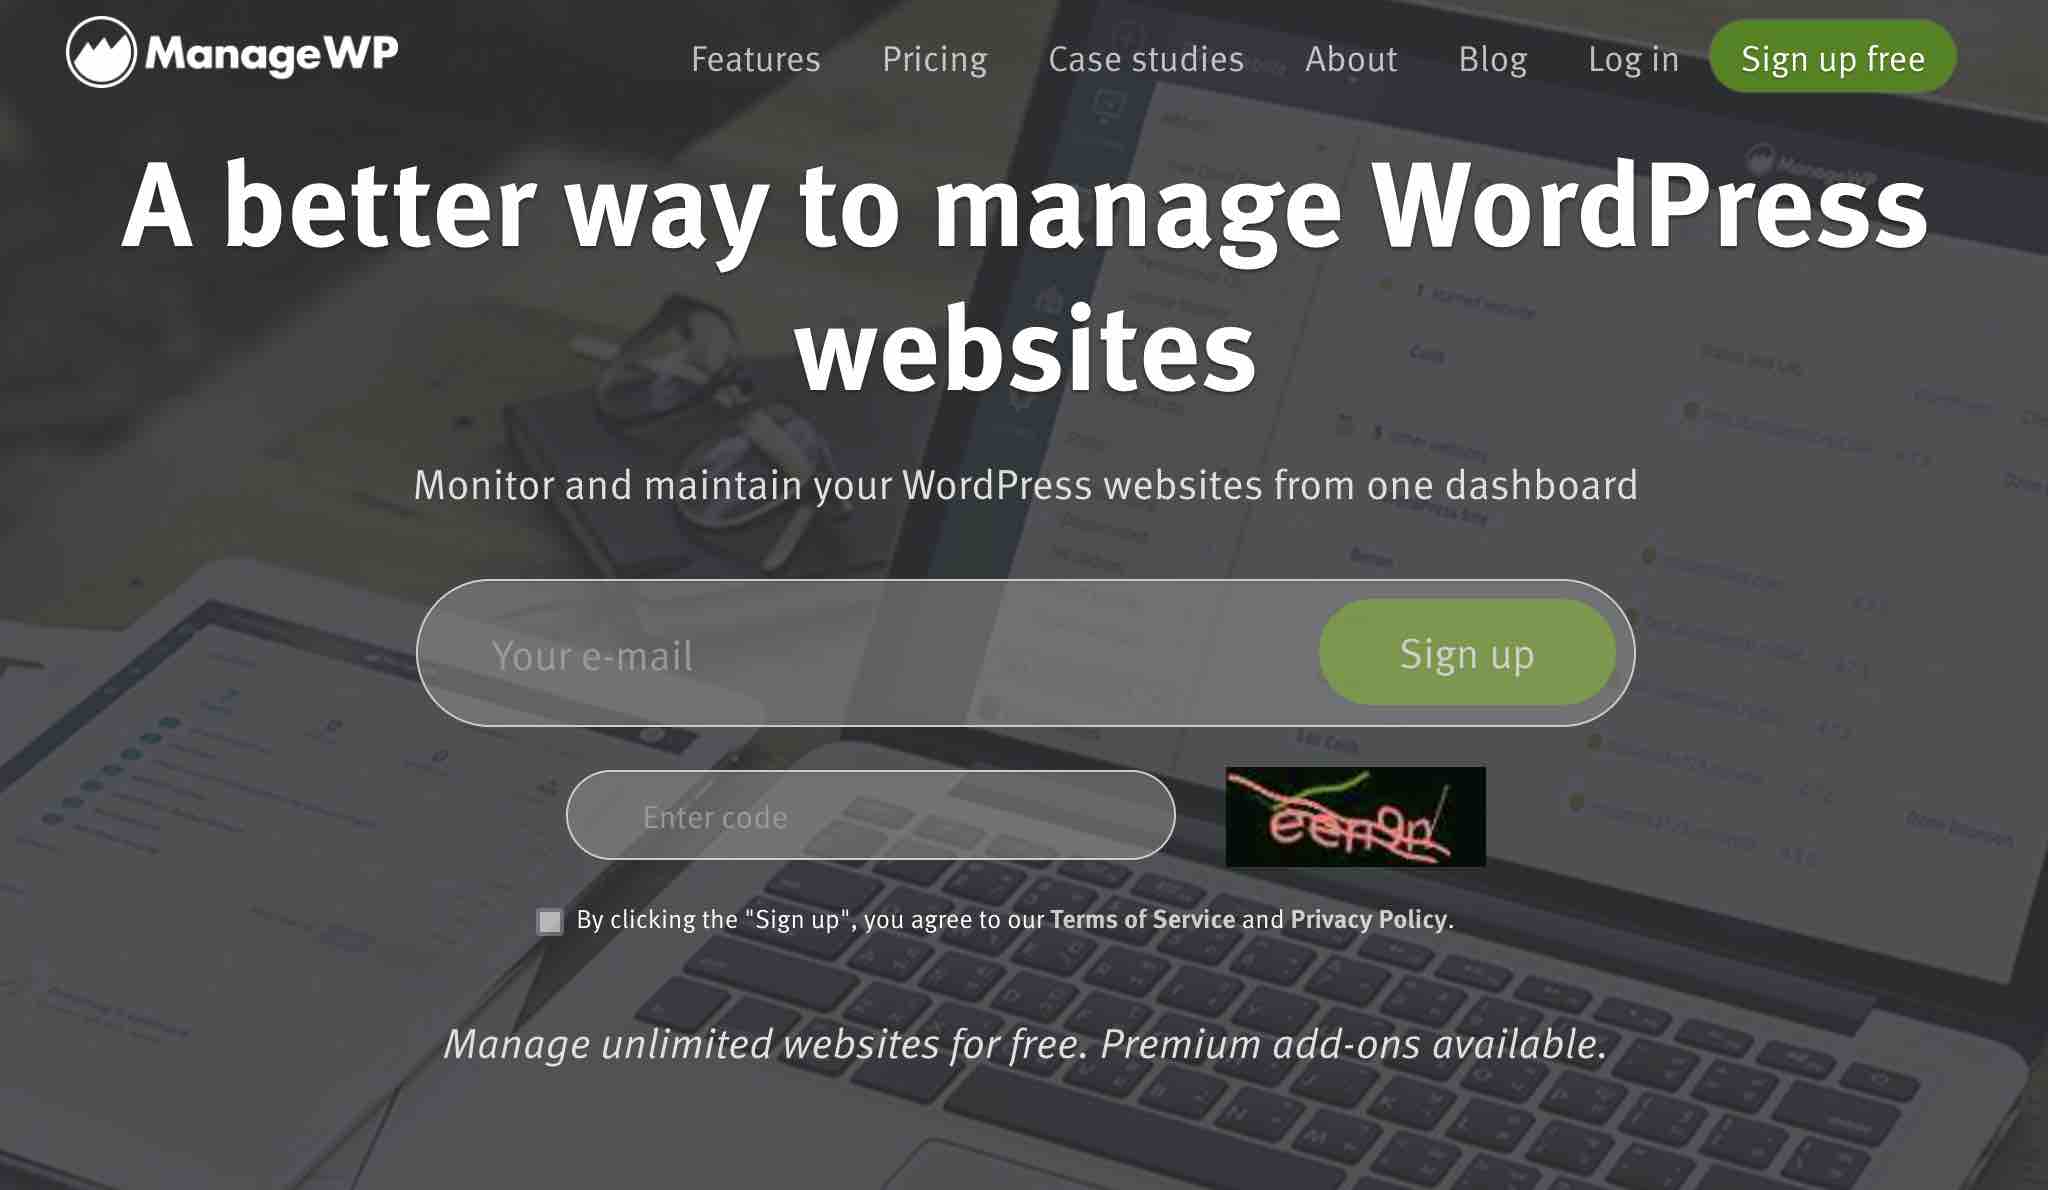 ManageWP allows you to maintain your WordPress sites.